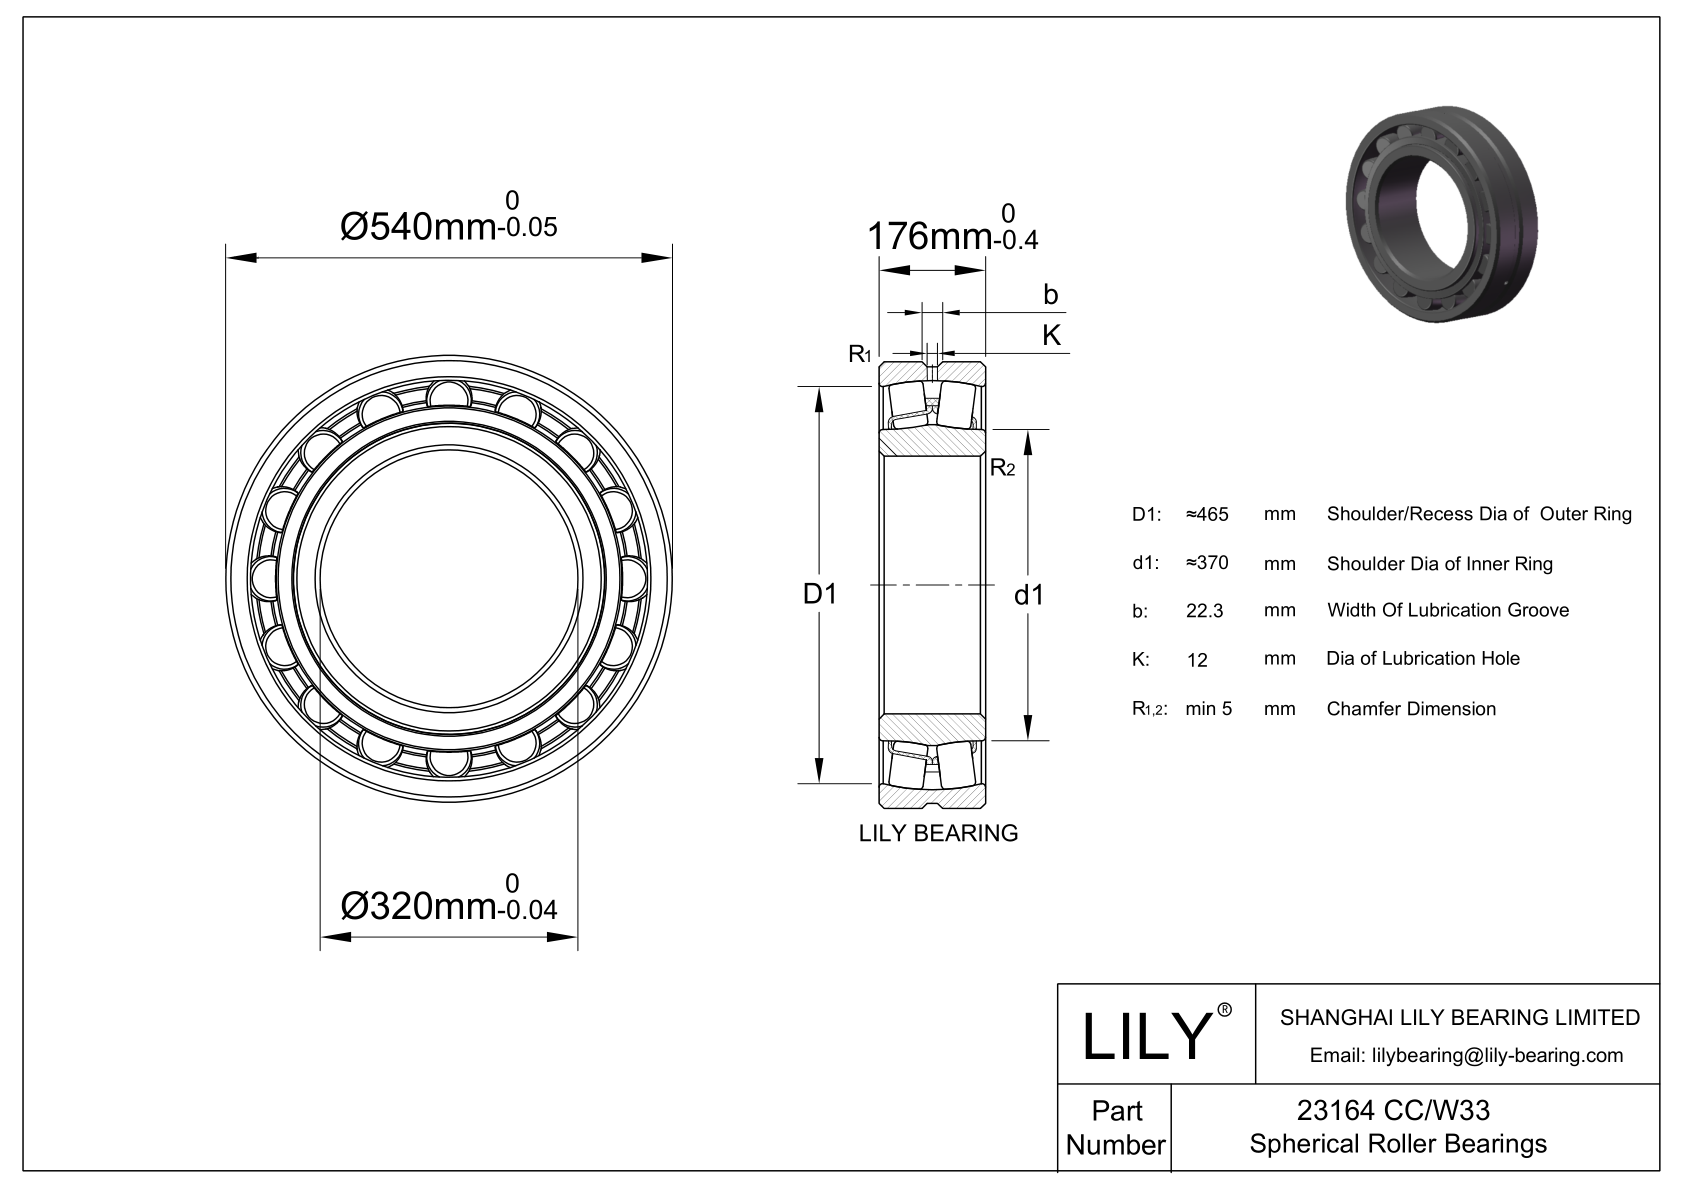 23164 CC/W33 Double Row Spherical Roller Bearing cad drawing